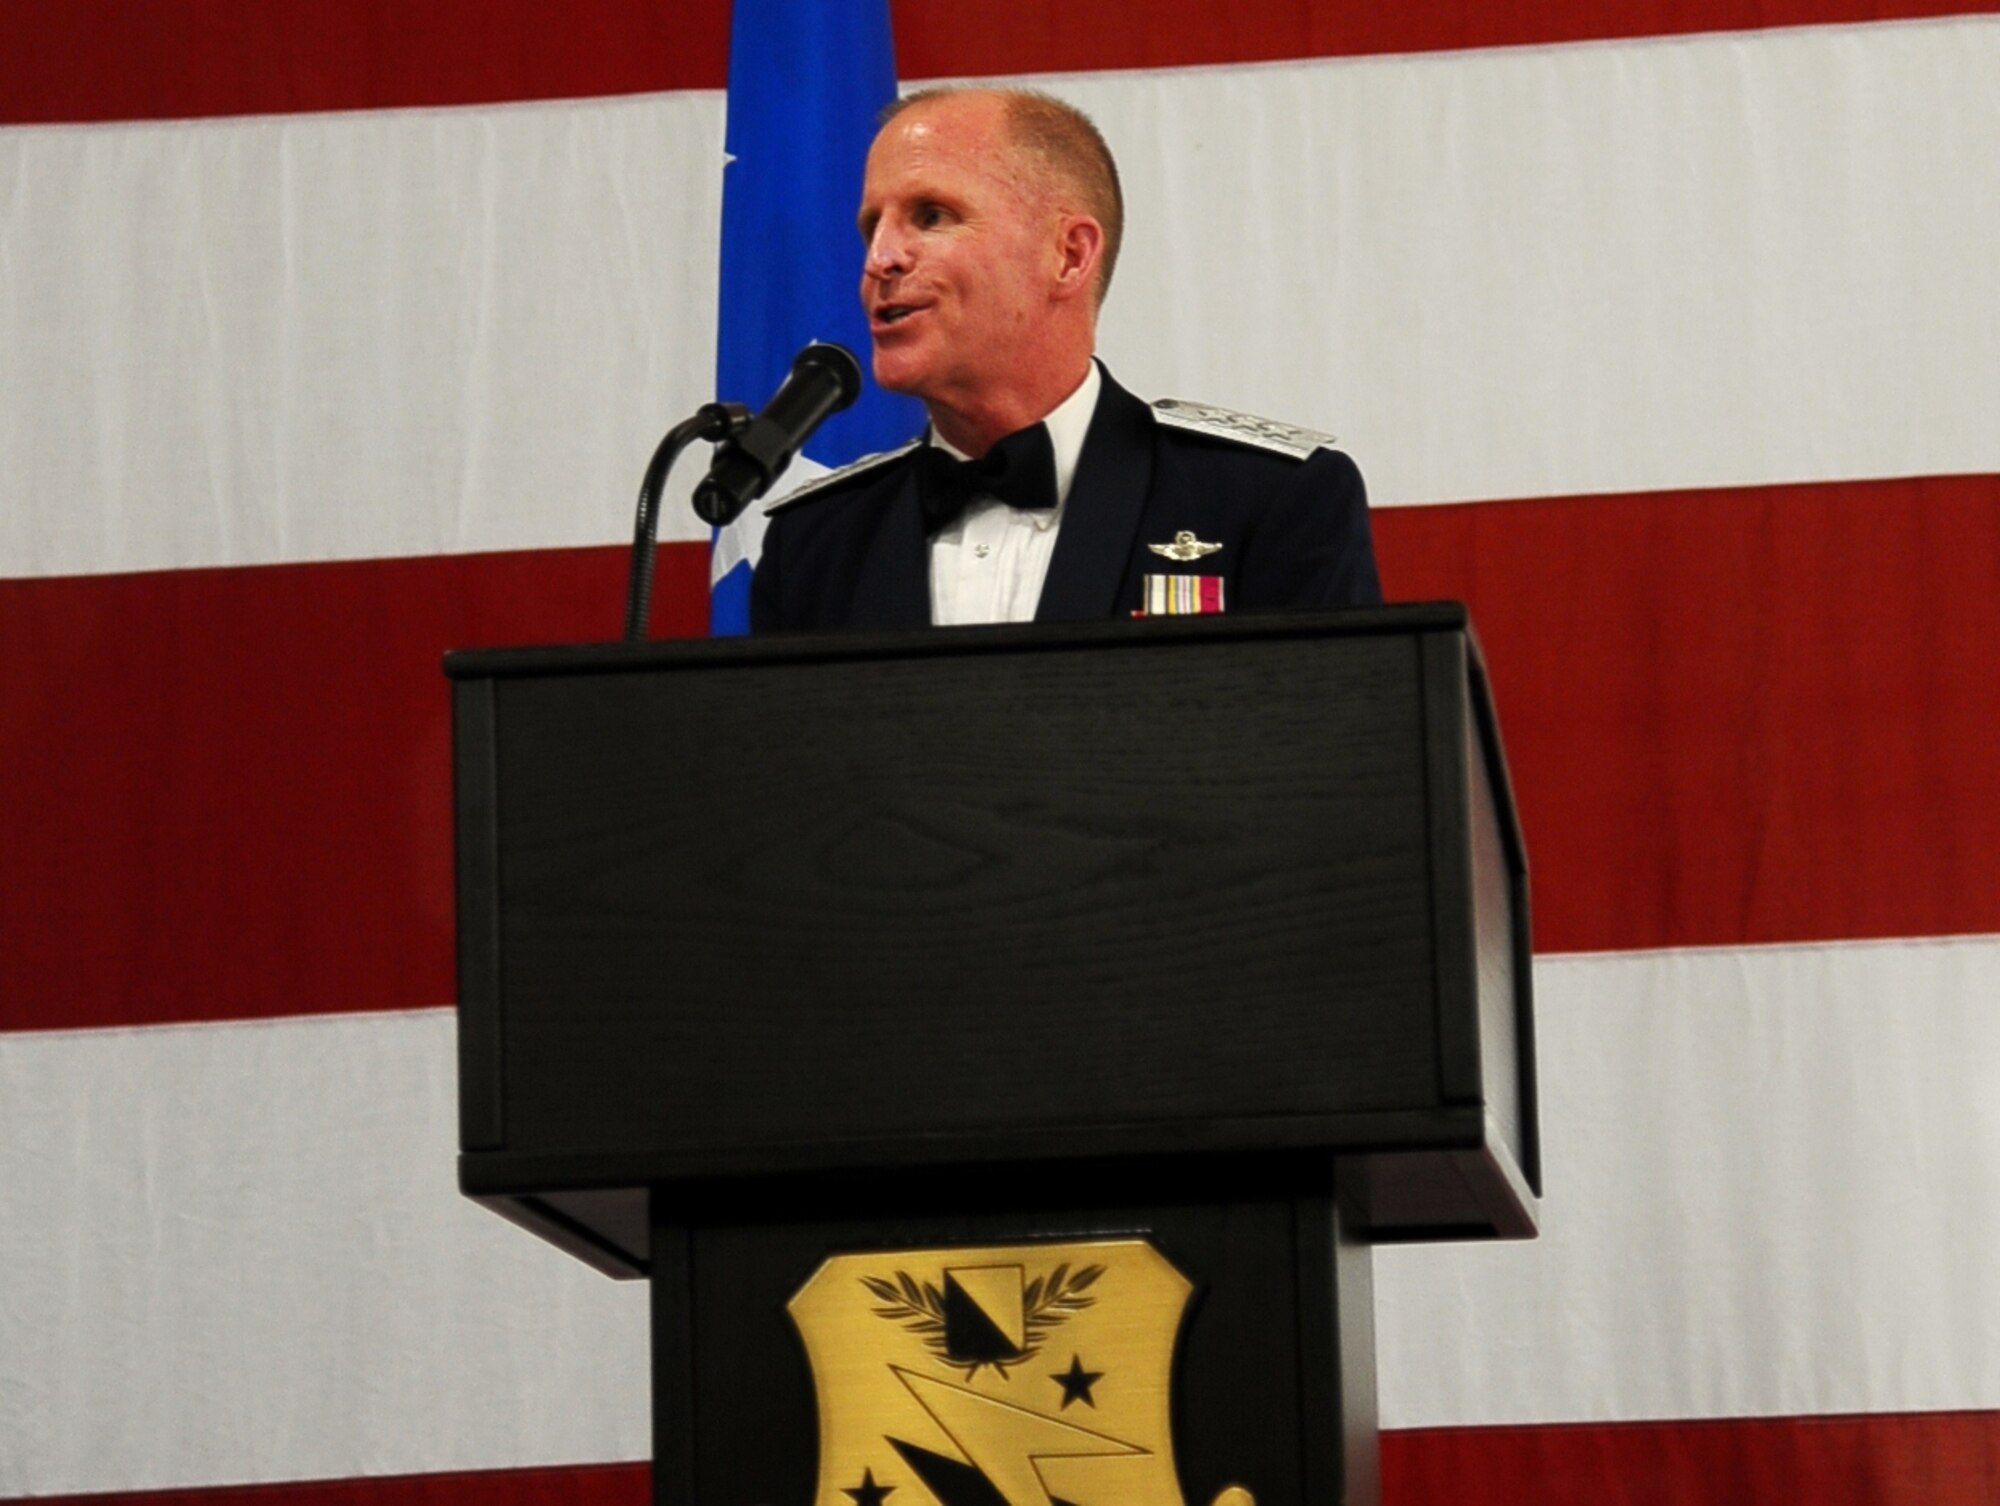 Lt. Gen. Stephen Wilson, Air Force Global Strike Command Commander, speaks during the Air Force Ball Sept. 5 at the Mallory Hangar on Columbus Air Force Base. The ball took place during Heritage Week, which also celebrated the 14th Flying Training Wing’s Specialized Undergraduate Pilot Training Class 14-14 graduation and included a wing commander’s reunion. (U.S. Air Force photo/Airman Daniel Lile)